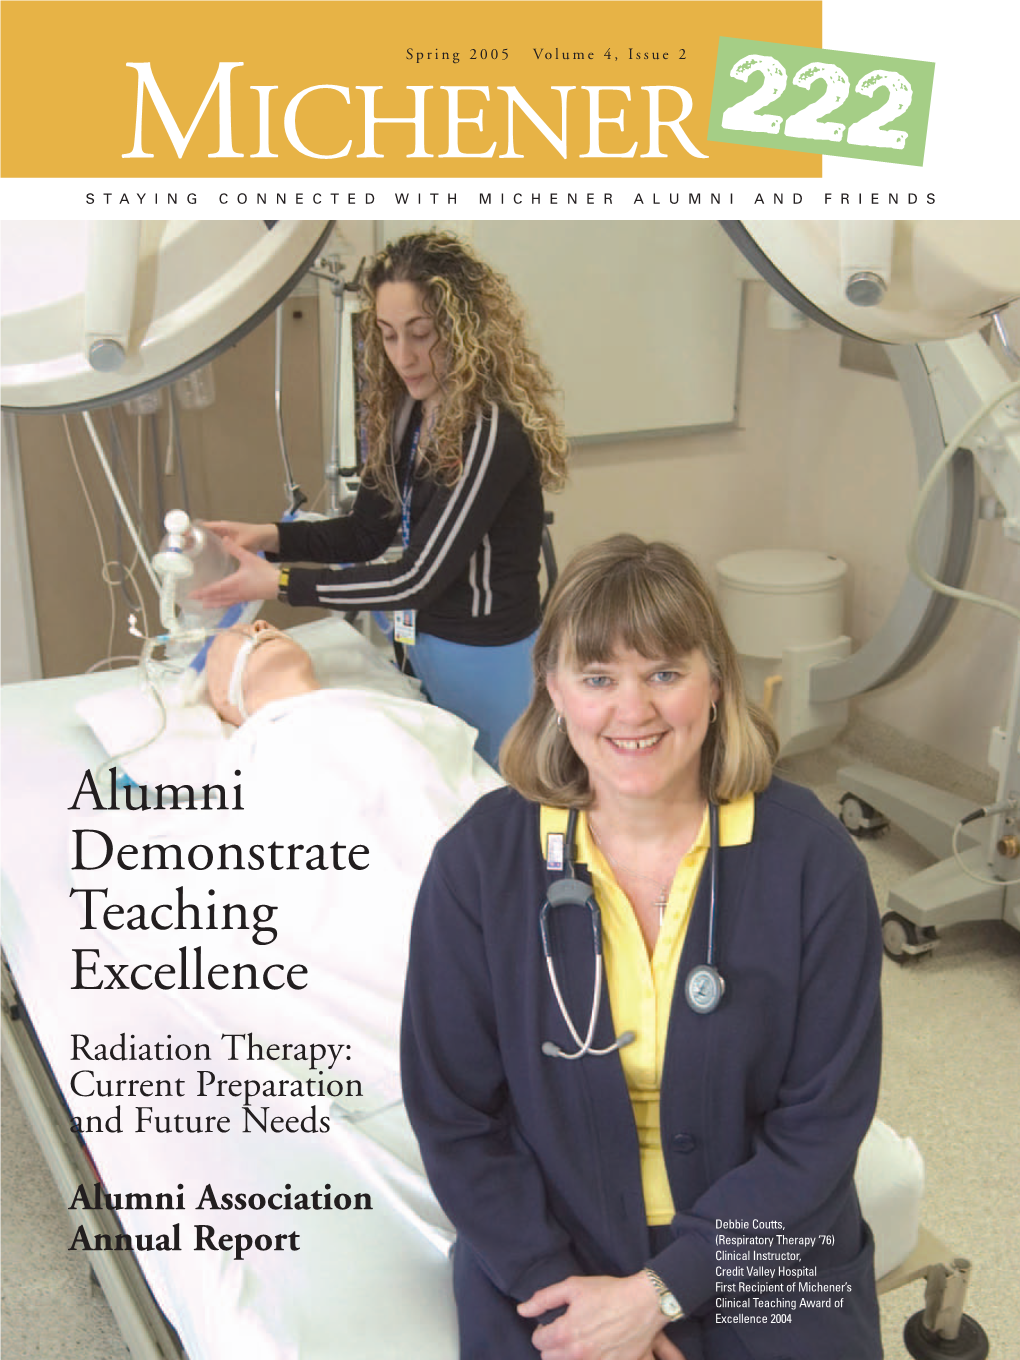 Alumni Demonstrate Teaching Excellence Radiation Therapy: Current Preparation and Future Needs